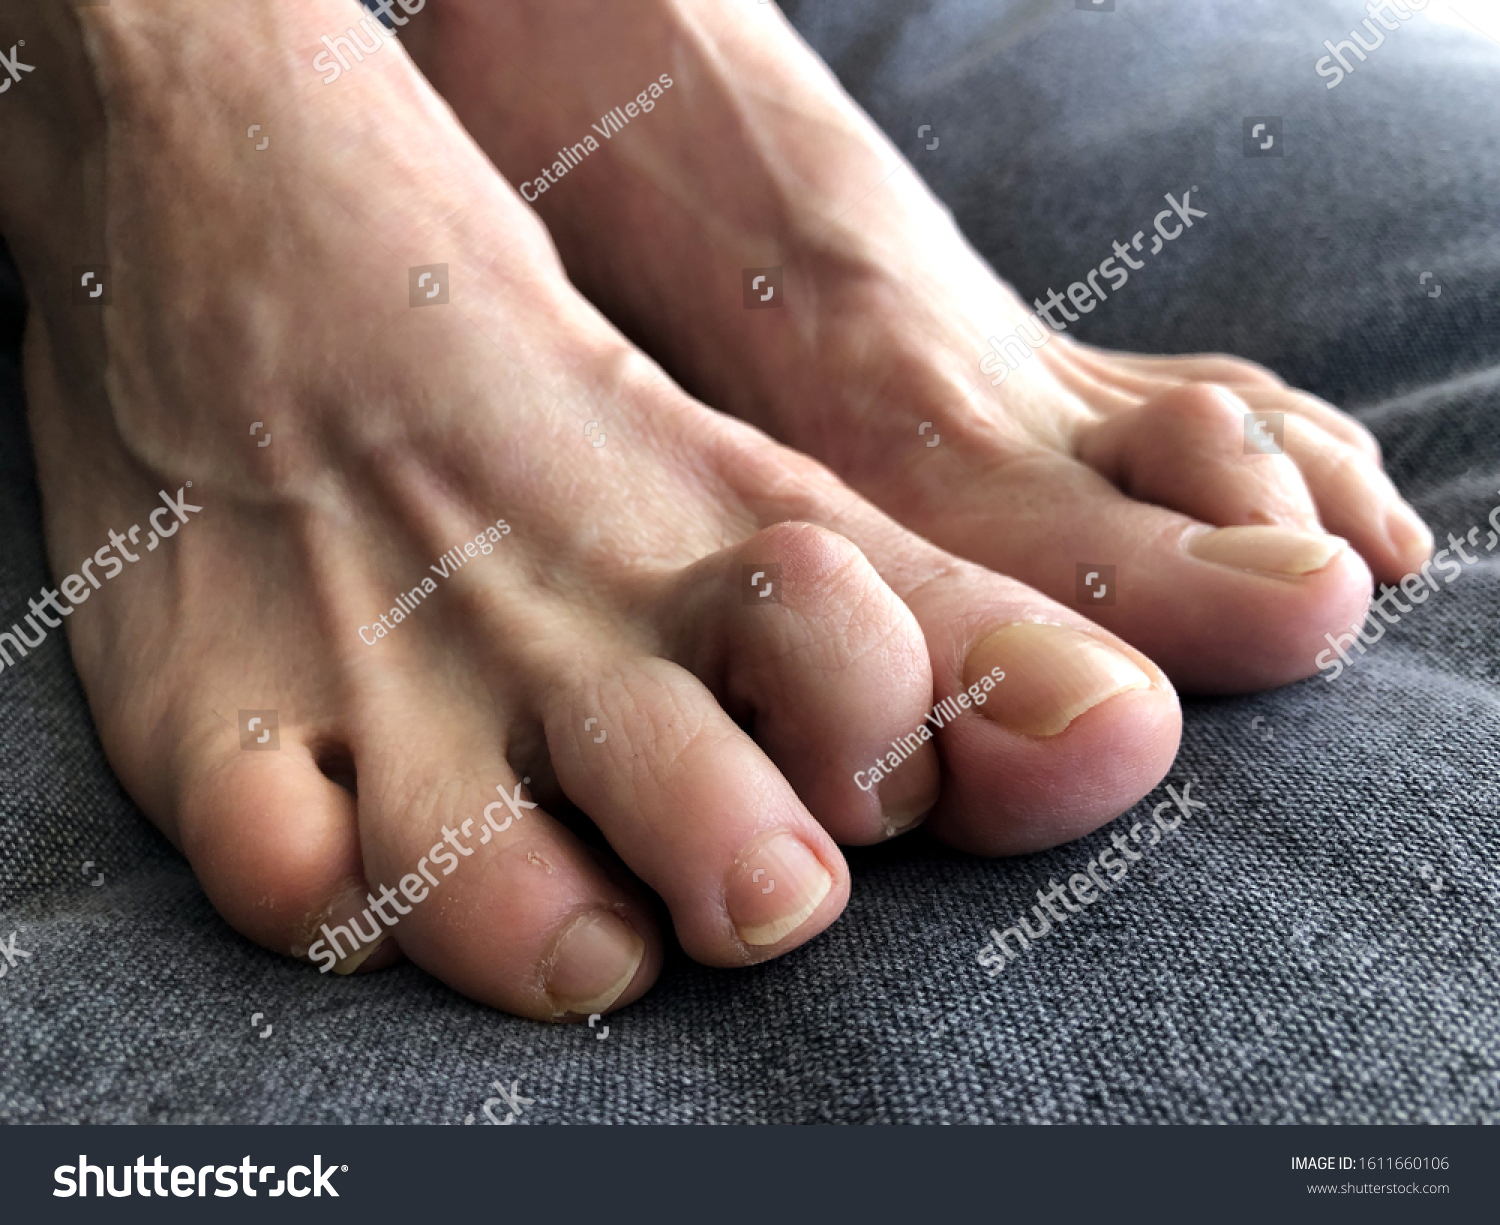 Woman's foot with hammer toe.  #1611660106